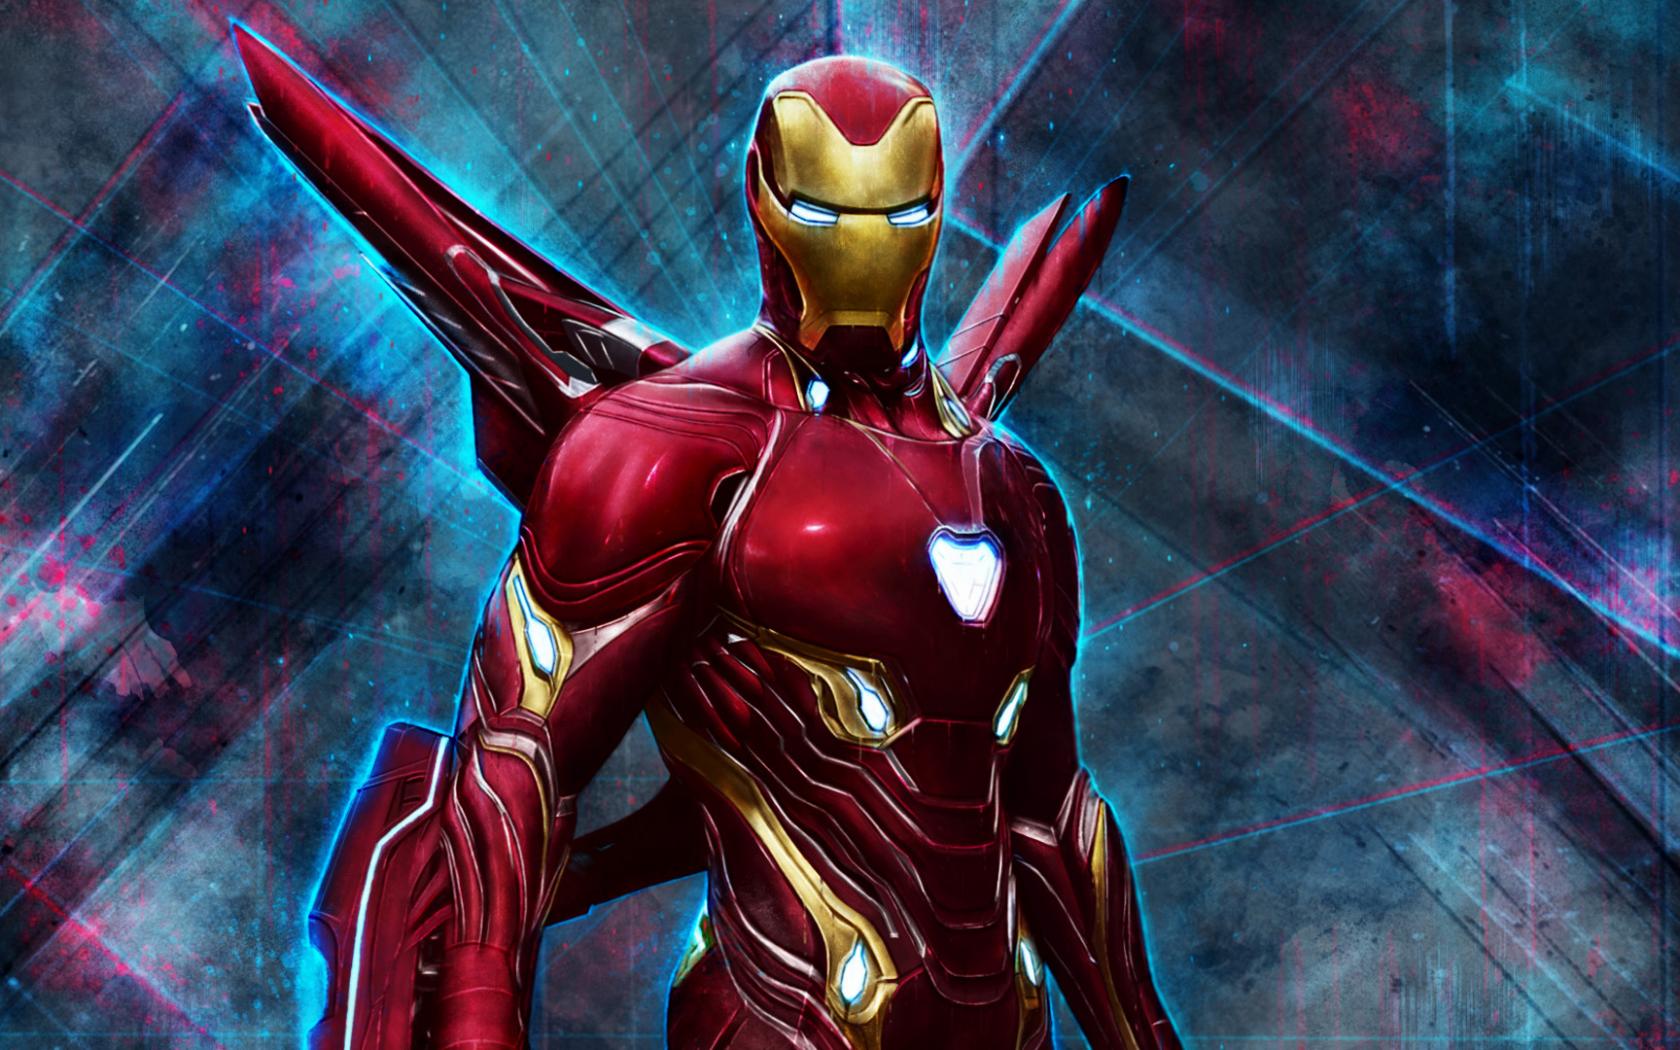 Iron Man Wallpaper with Mark L Armor Suit Wallpaper. Wallpaper Download. High Resolution Wallpaper